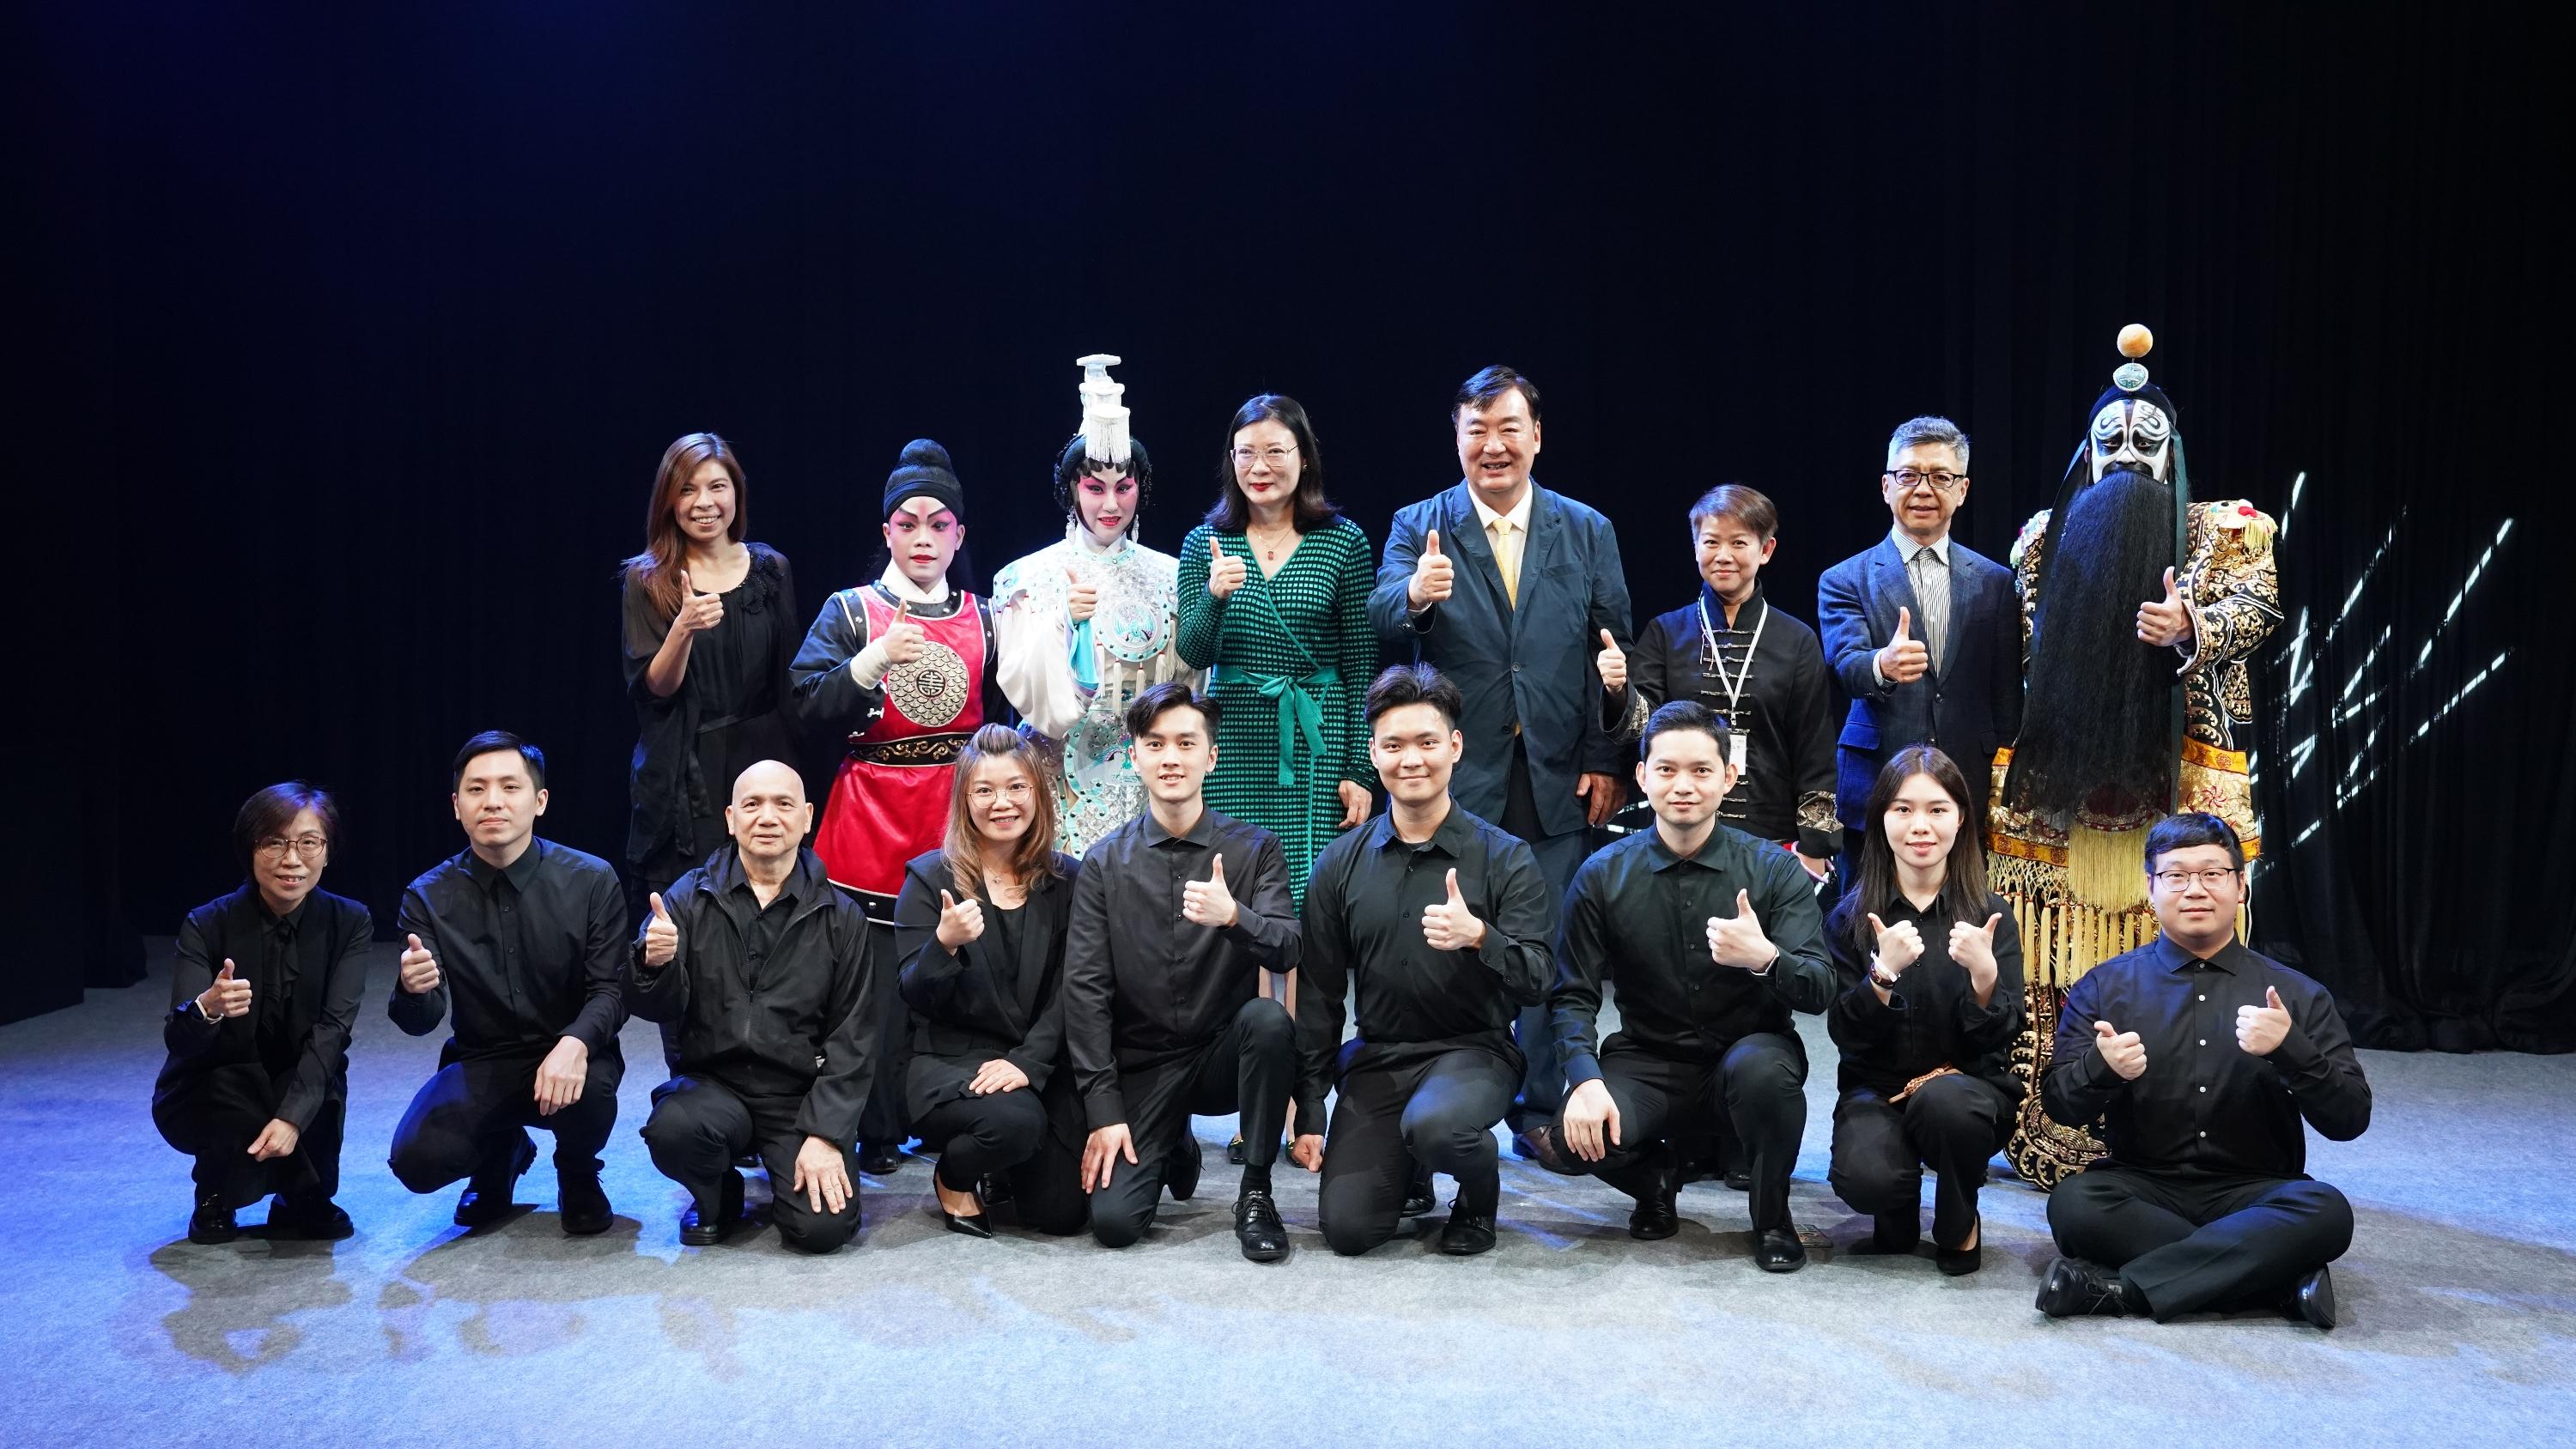 The West Kowloon Cultural District Xiqu Centre presented the Experimental Cantonese Opera "Farewell My Concubine" (New Adaptation) at the National Gugak Center in Seoul, Korea, yesterday and today (September 20 and 21). Photo shows the Principal Hong Kong Economic and Trade Representative (Tokyo), Miss Winsome Au (second row, first left); the Chinese Ambassador to the Republic of Korea, Mr Xing Haiming (second row, fourth right); the spouse of the Chinese Ambassador to the Republic of Korea, Ms Tan Yujun (second row, fourth left); and the Head of Xiqu, Performing Arts, West Kowloon Cultural District Authority and Producer of the Experimental Cantonese Opera "Farewell My Concubine" (New Adaptation), Ms Naomi Chung (second row, third right),are pictured with the artistic and production team after a performance yesterday.